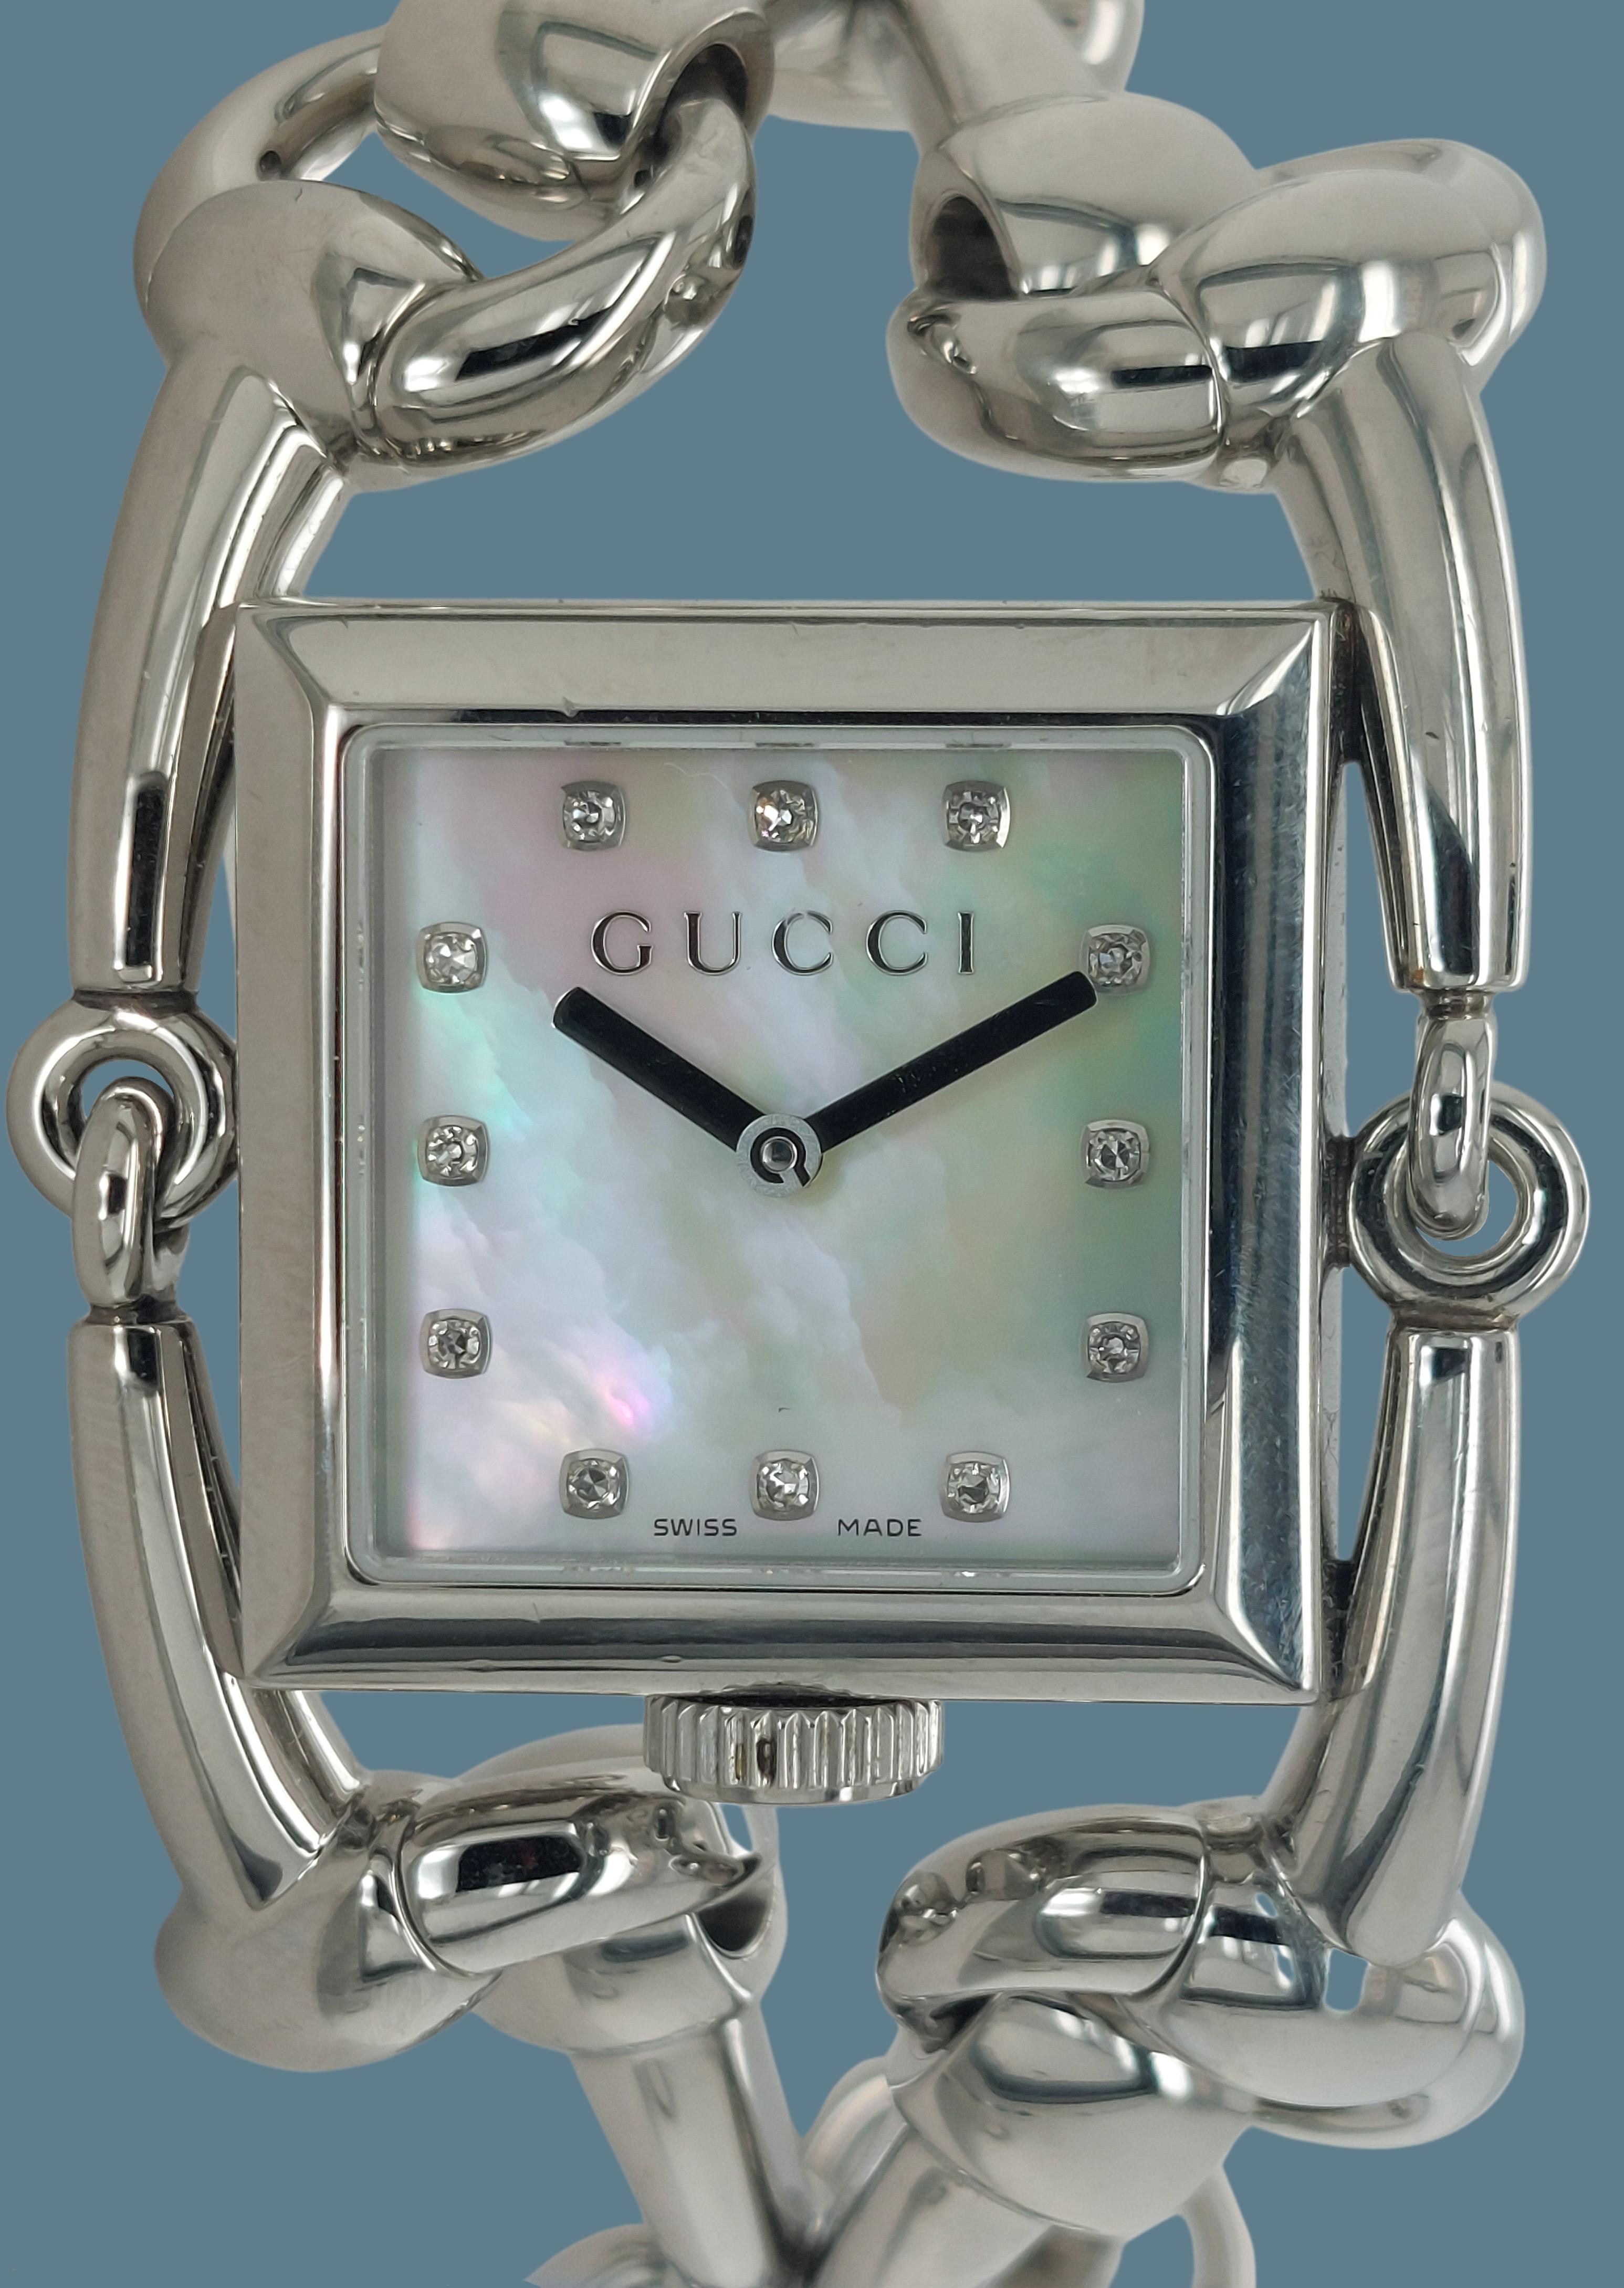 Artisan Gucci 116.3 Signoria Horsebit Watch with MOP Dial, Quartz with Box & Papers